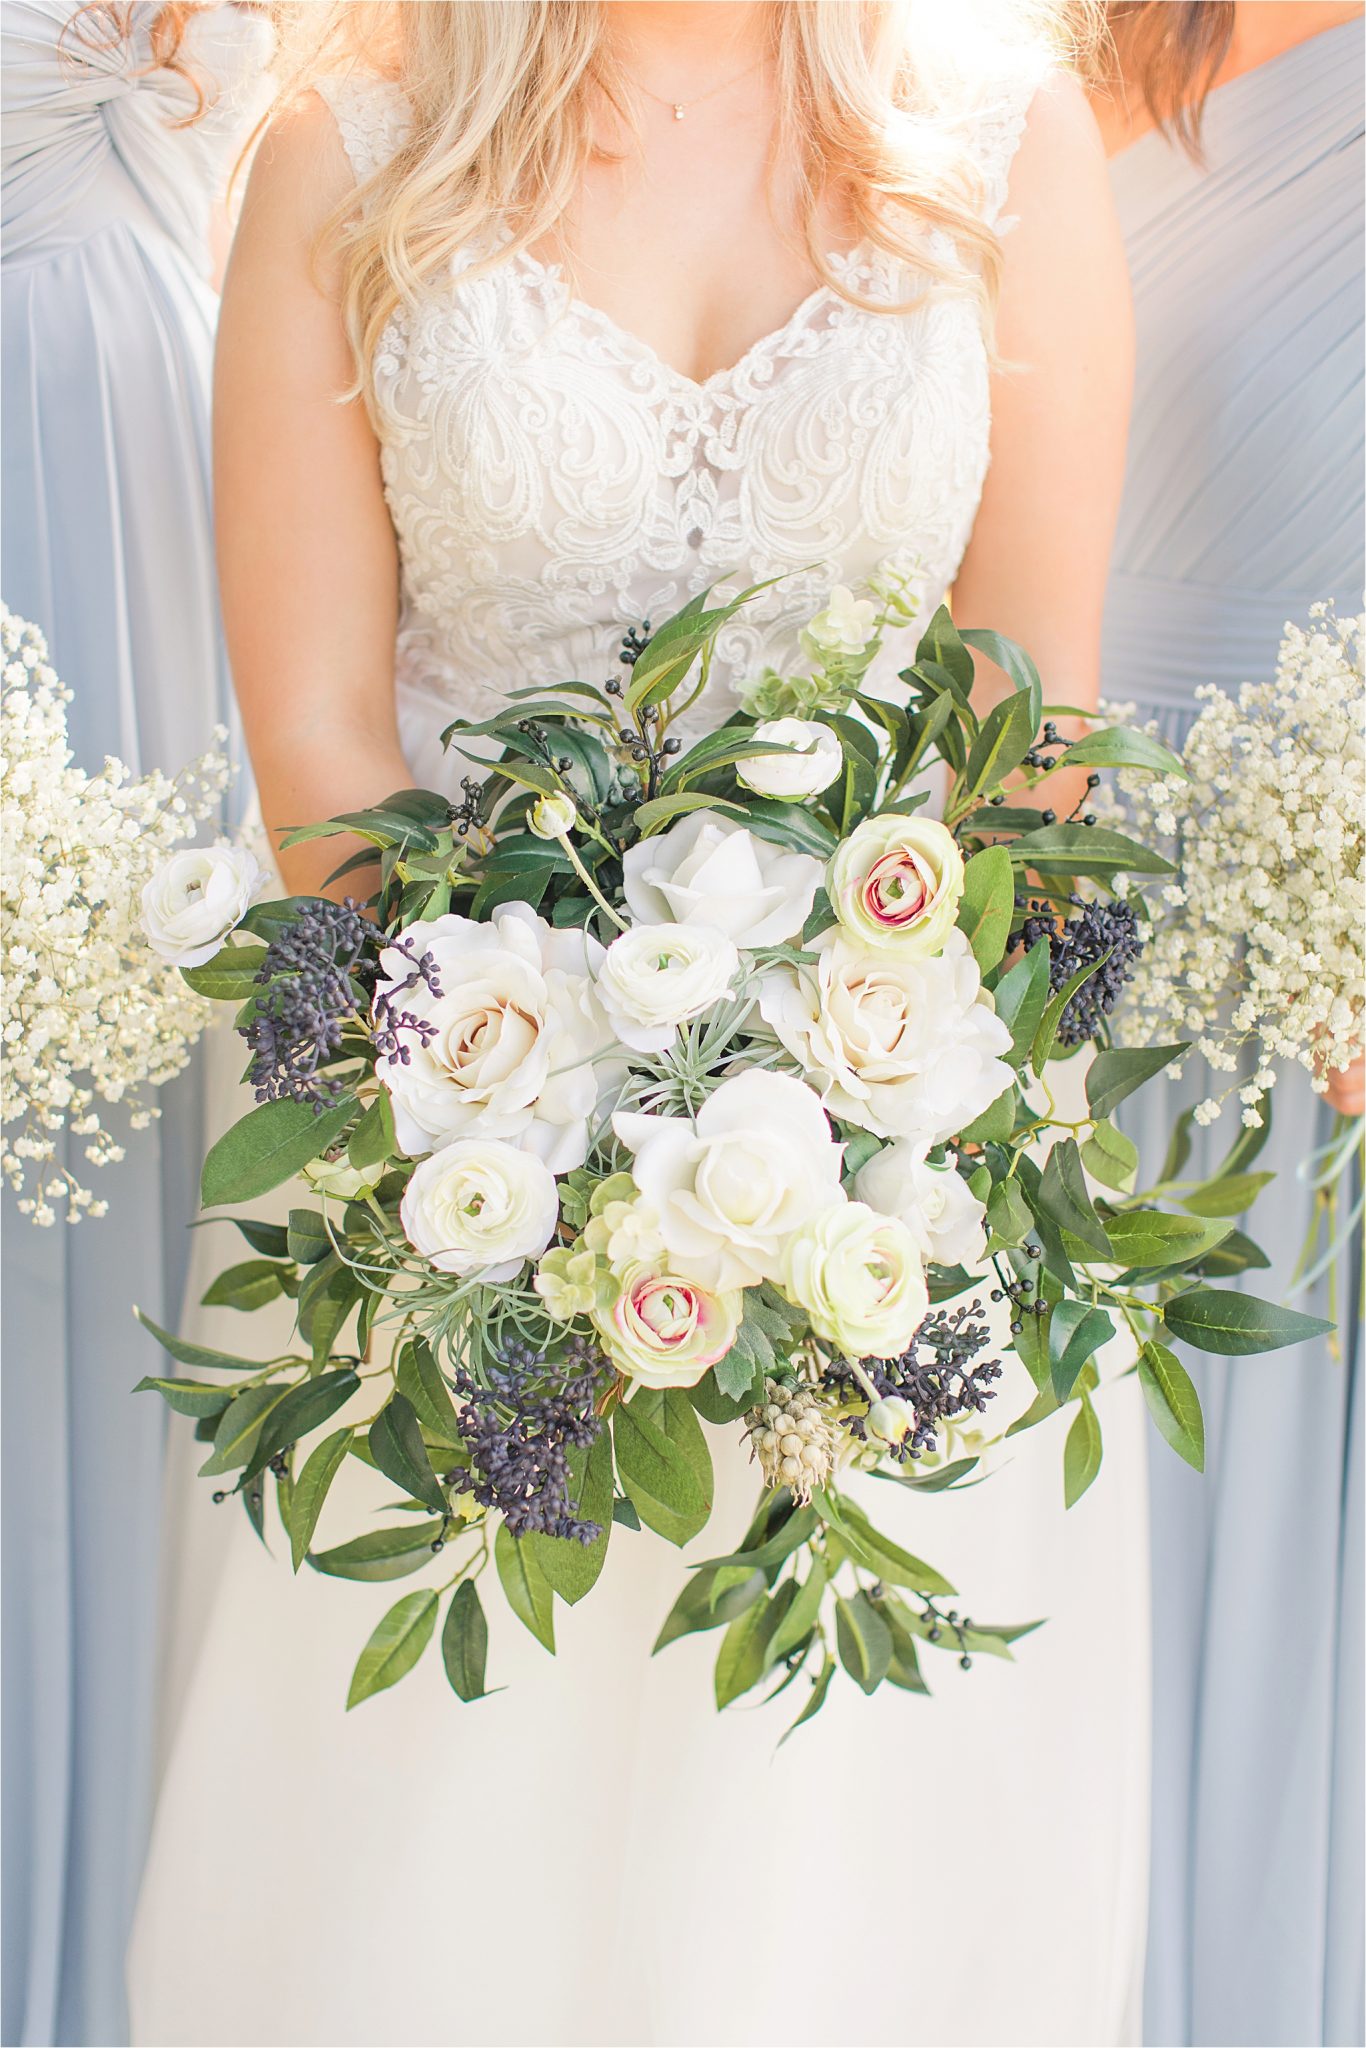 bridal-bouquets-raspberry-periwinkle-blue-white-roses-lace-wedding-dress